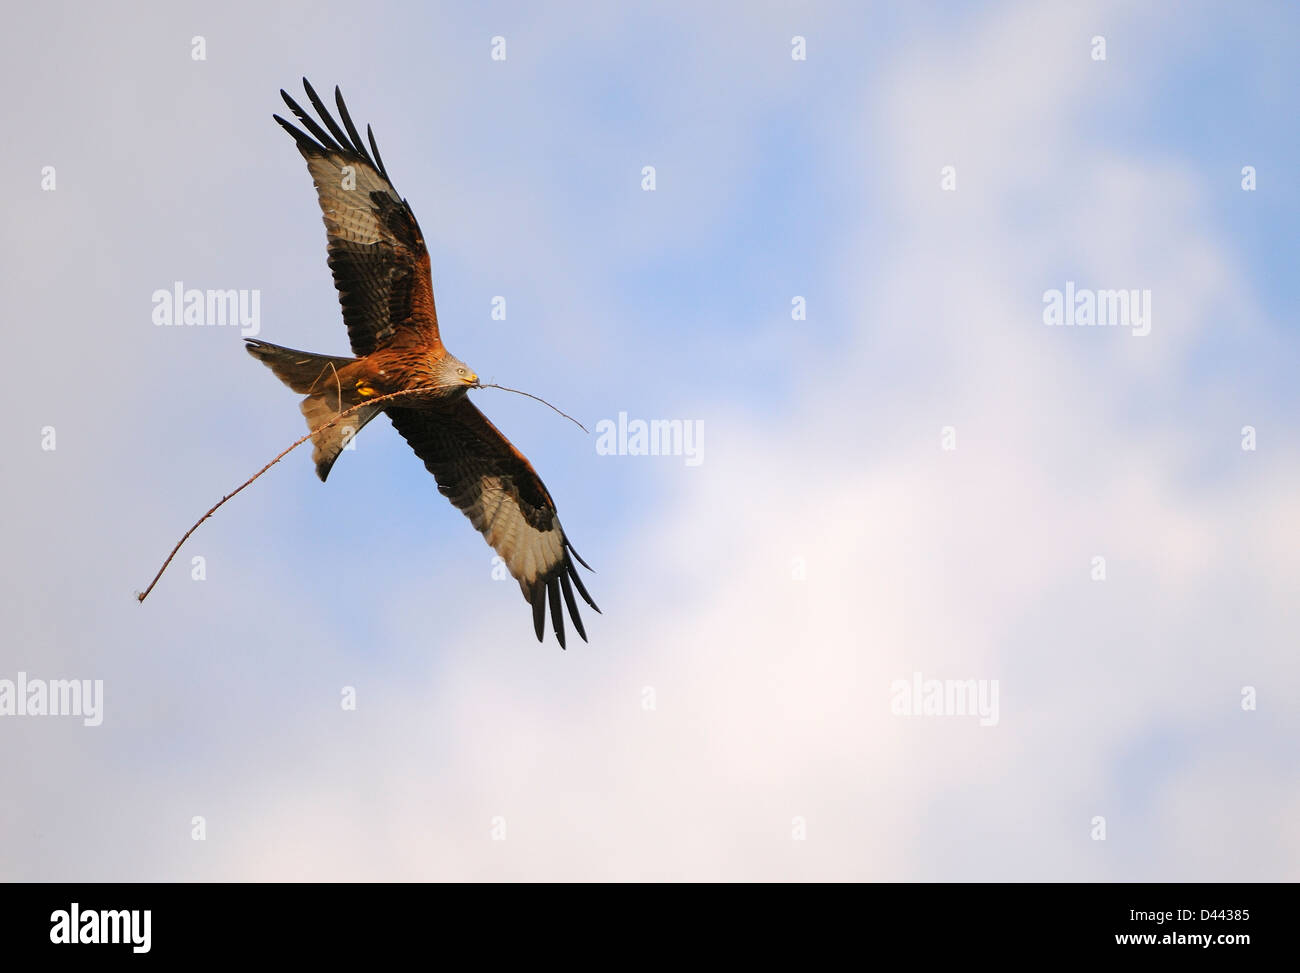 Red Kite (Milvus milvus) in flight with nesting material in its beak, Oxfordshire, England, March Stock Photo